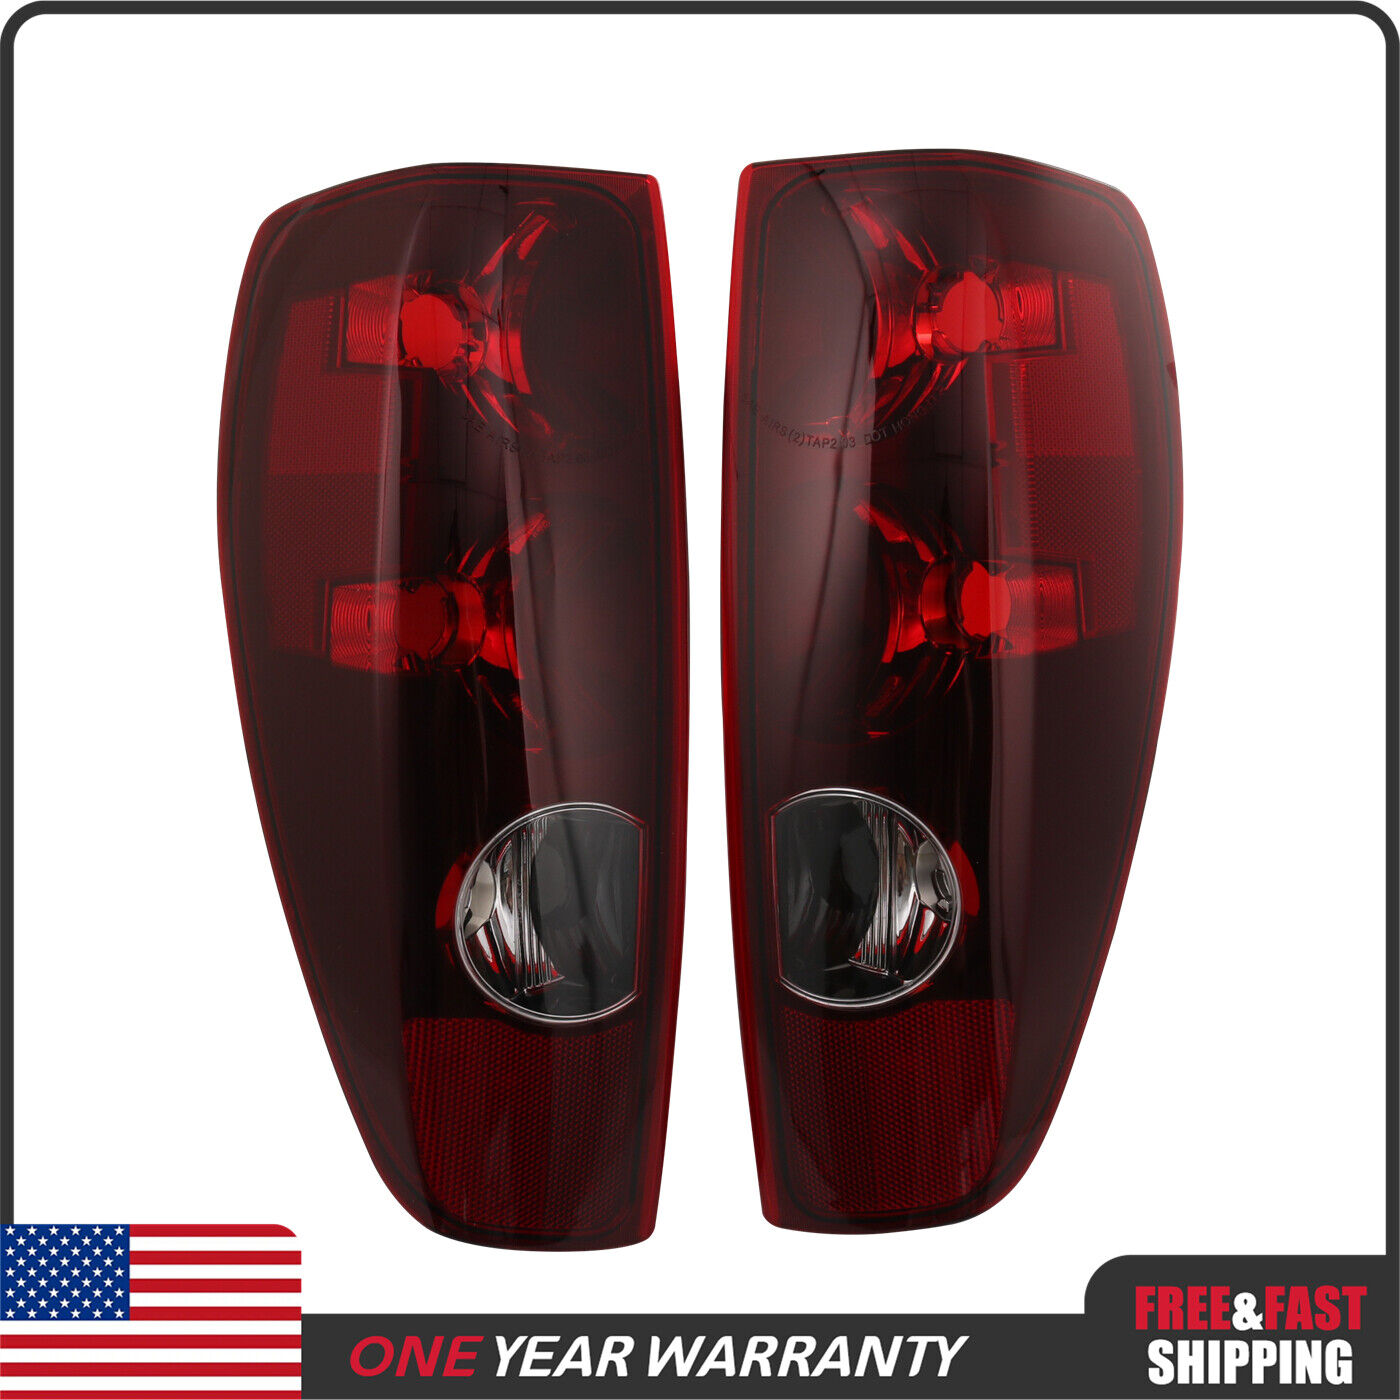 Pair Tail Lights Lamps New Fits For Chevy Colorado GMC Canyon Pickup 2004-2012